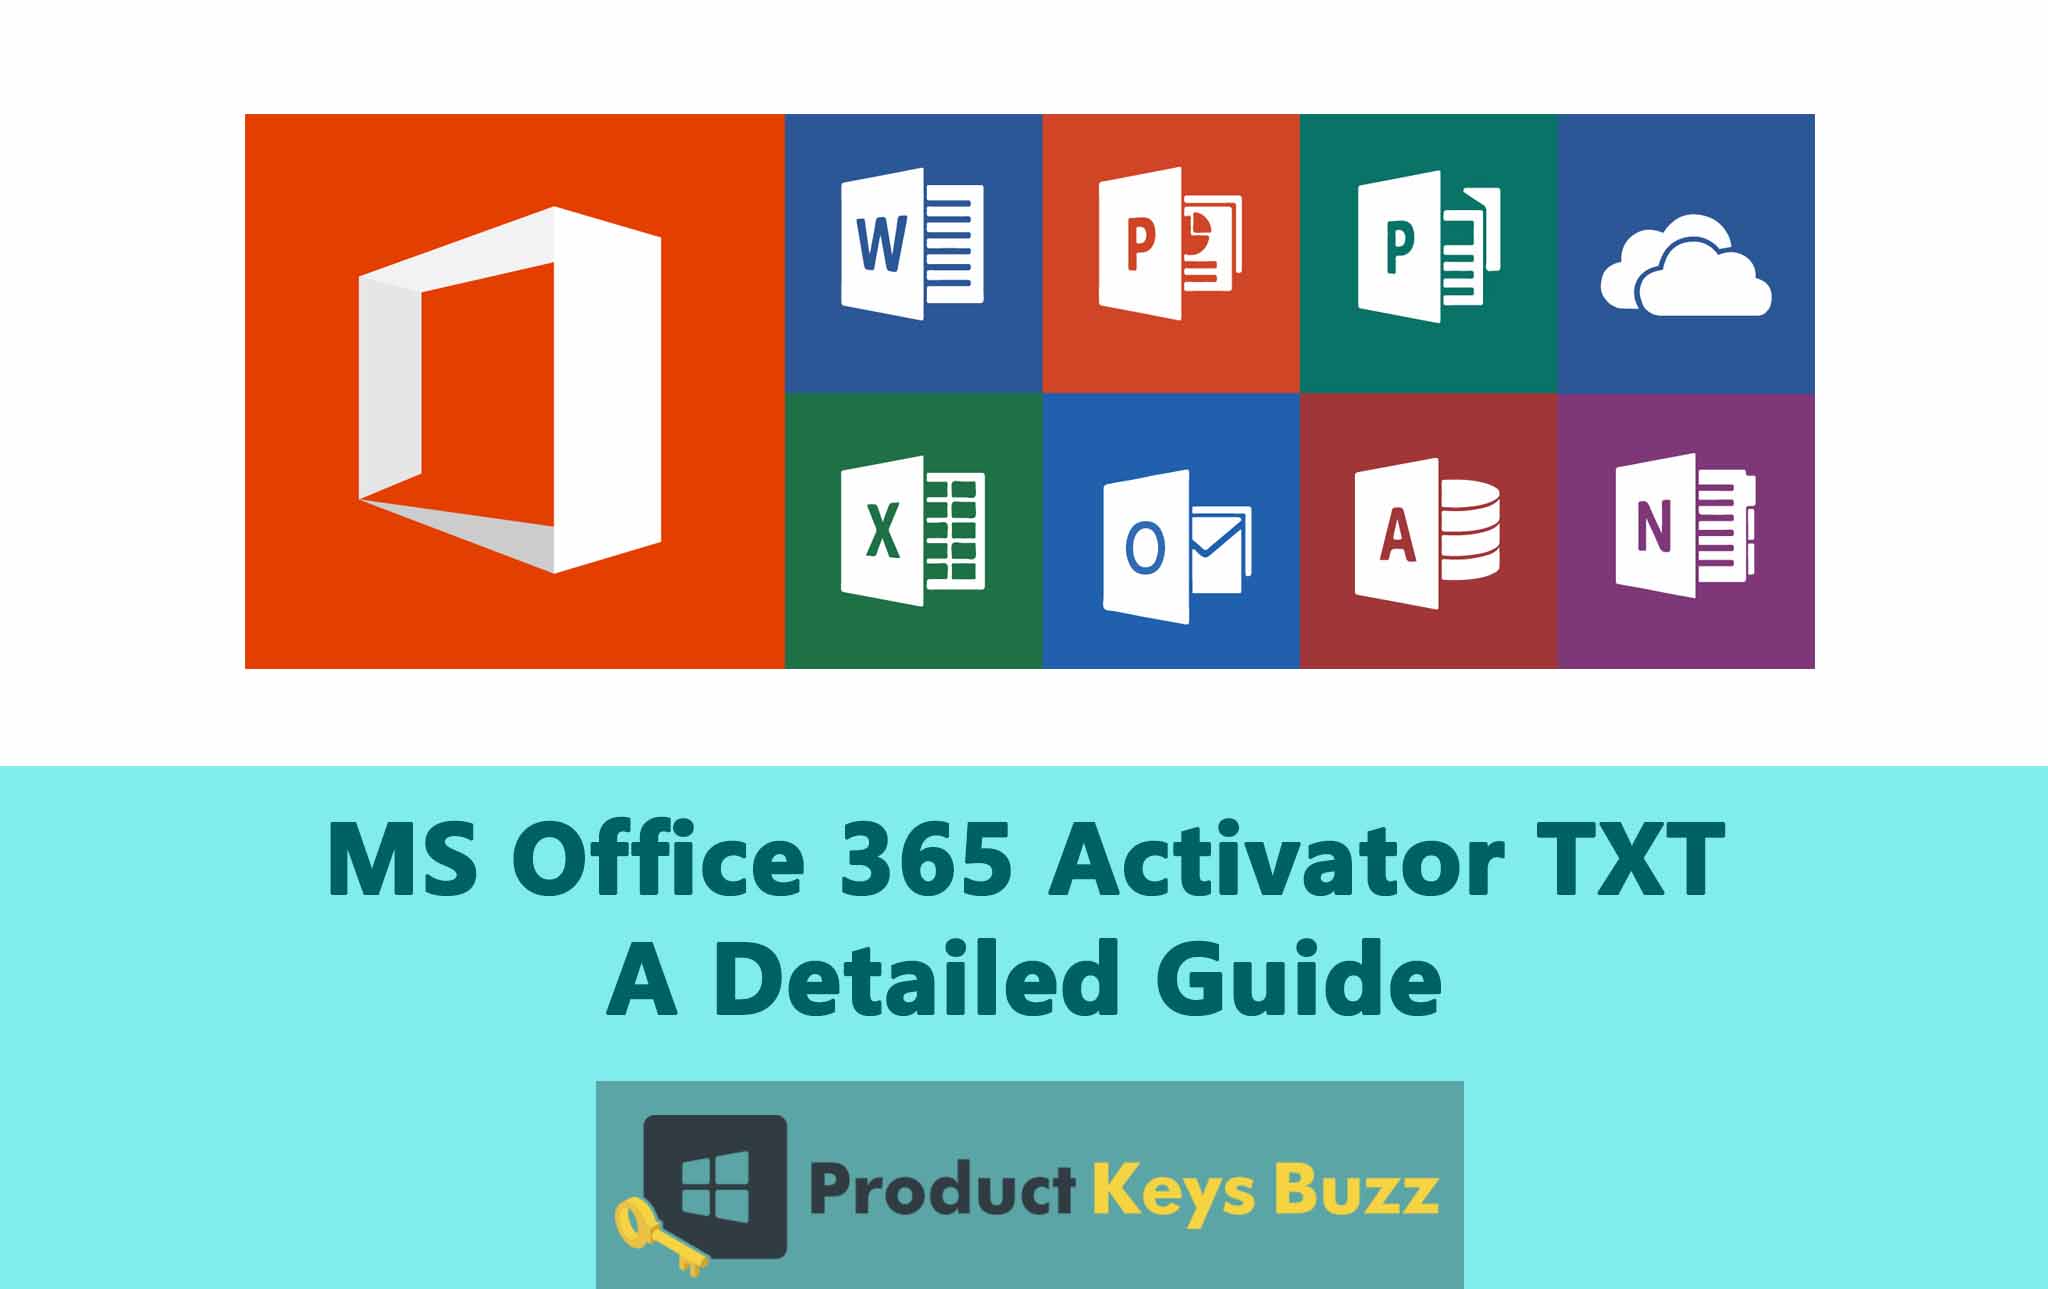 MS Office 365 Activator TXT